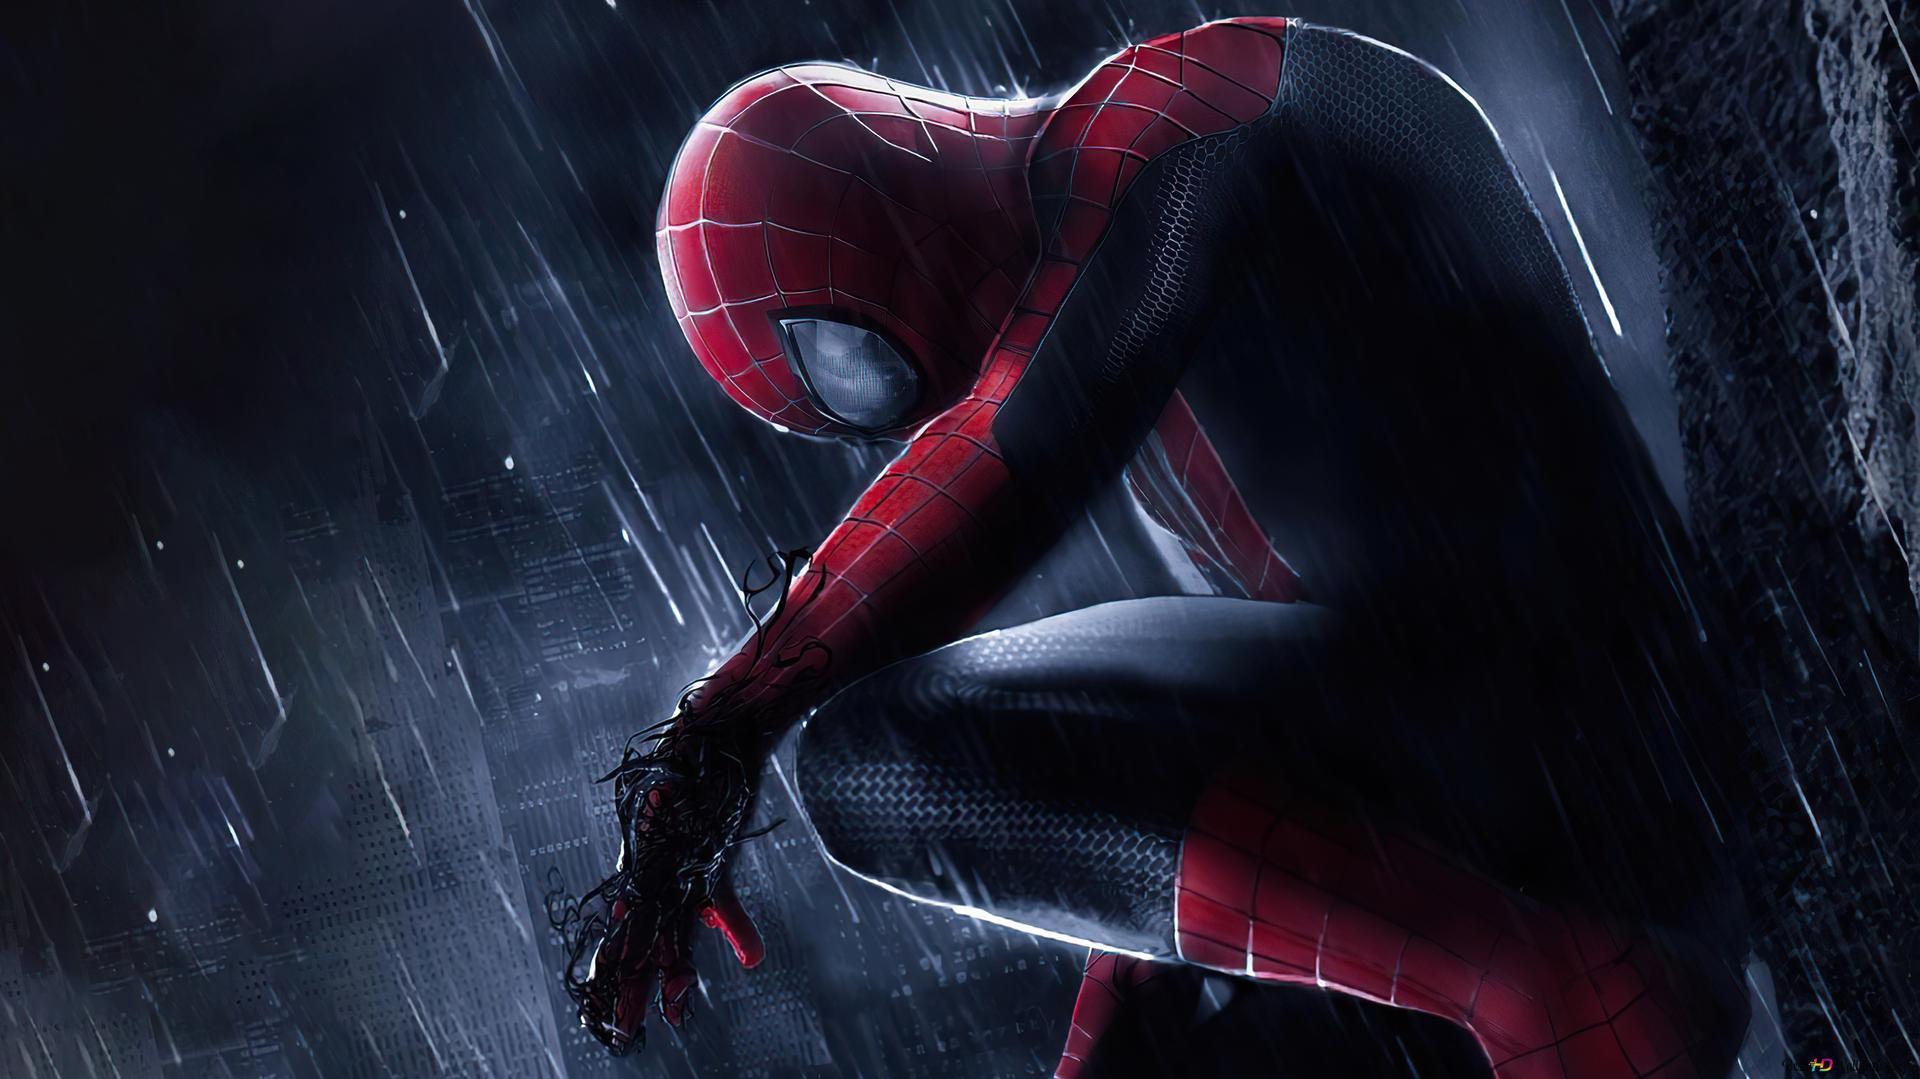 Spider Man Sitting On Building In The Rain 4K wallpaper download